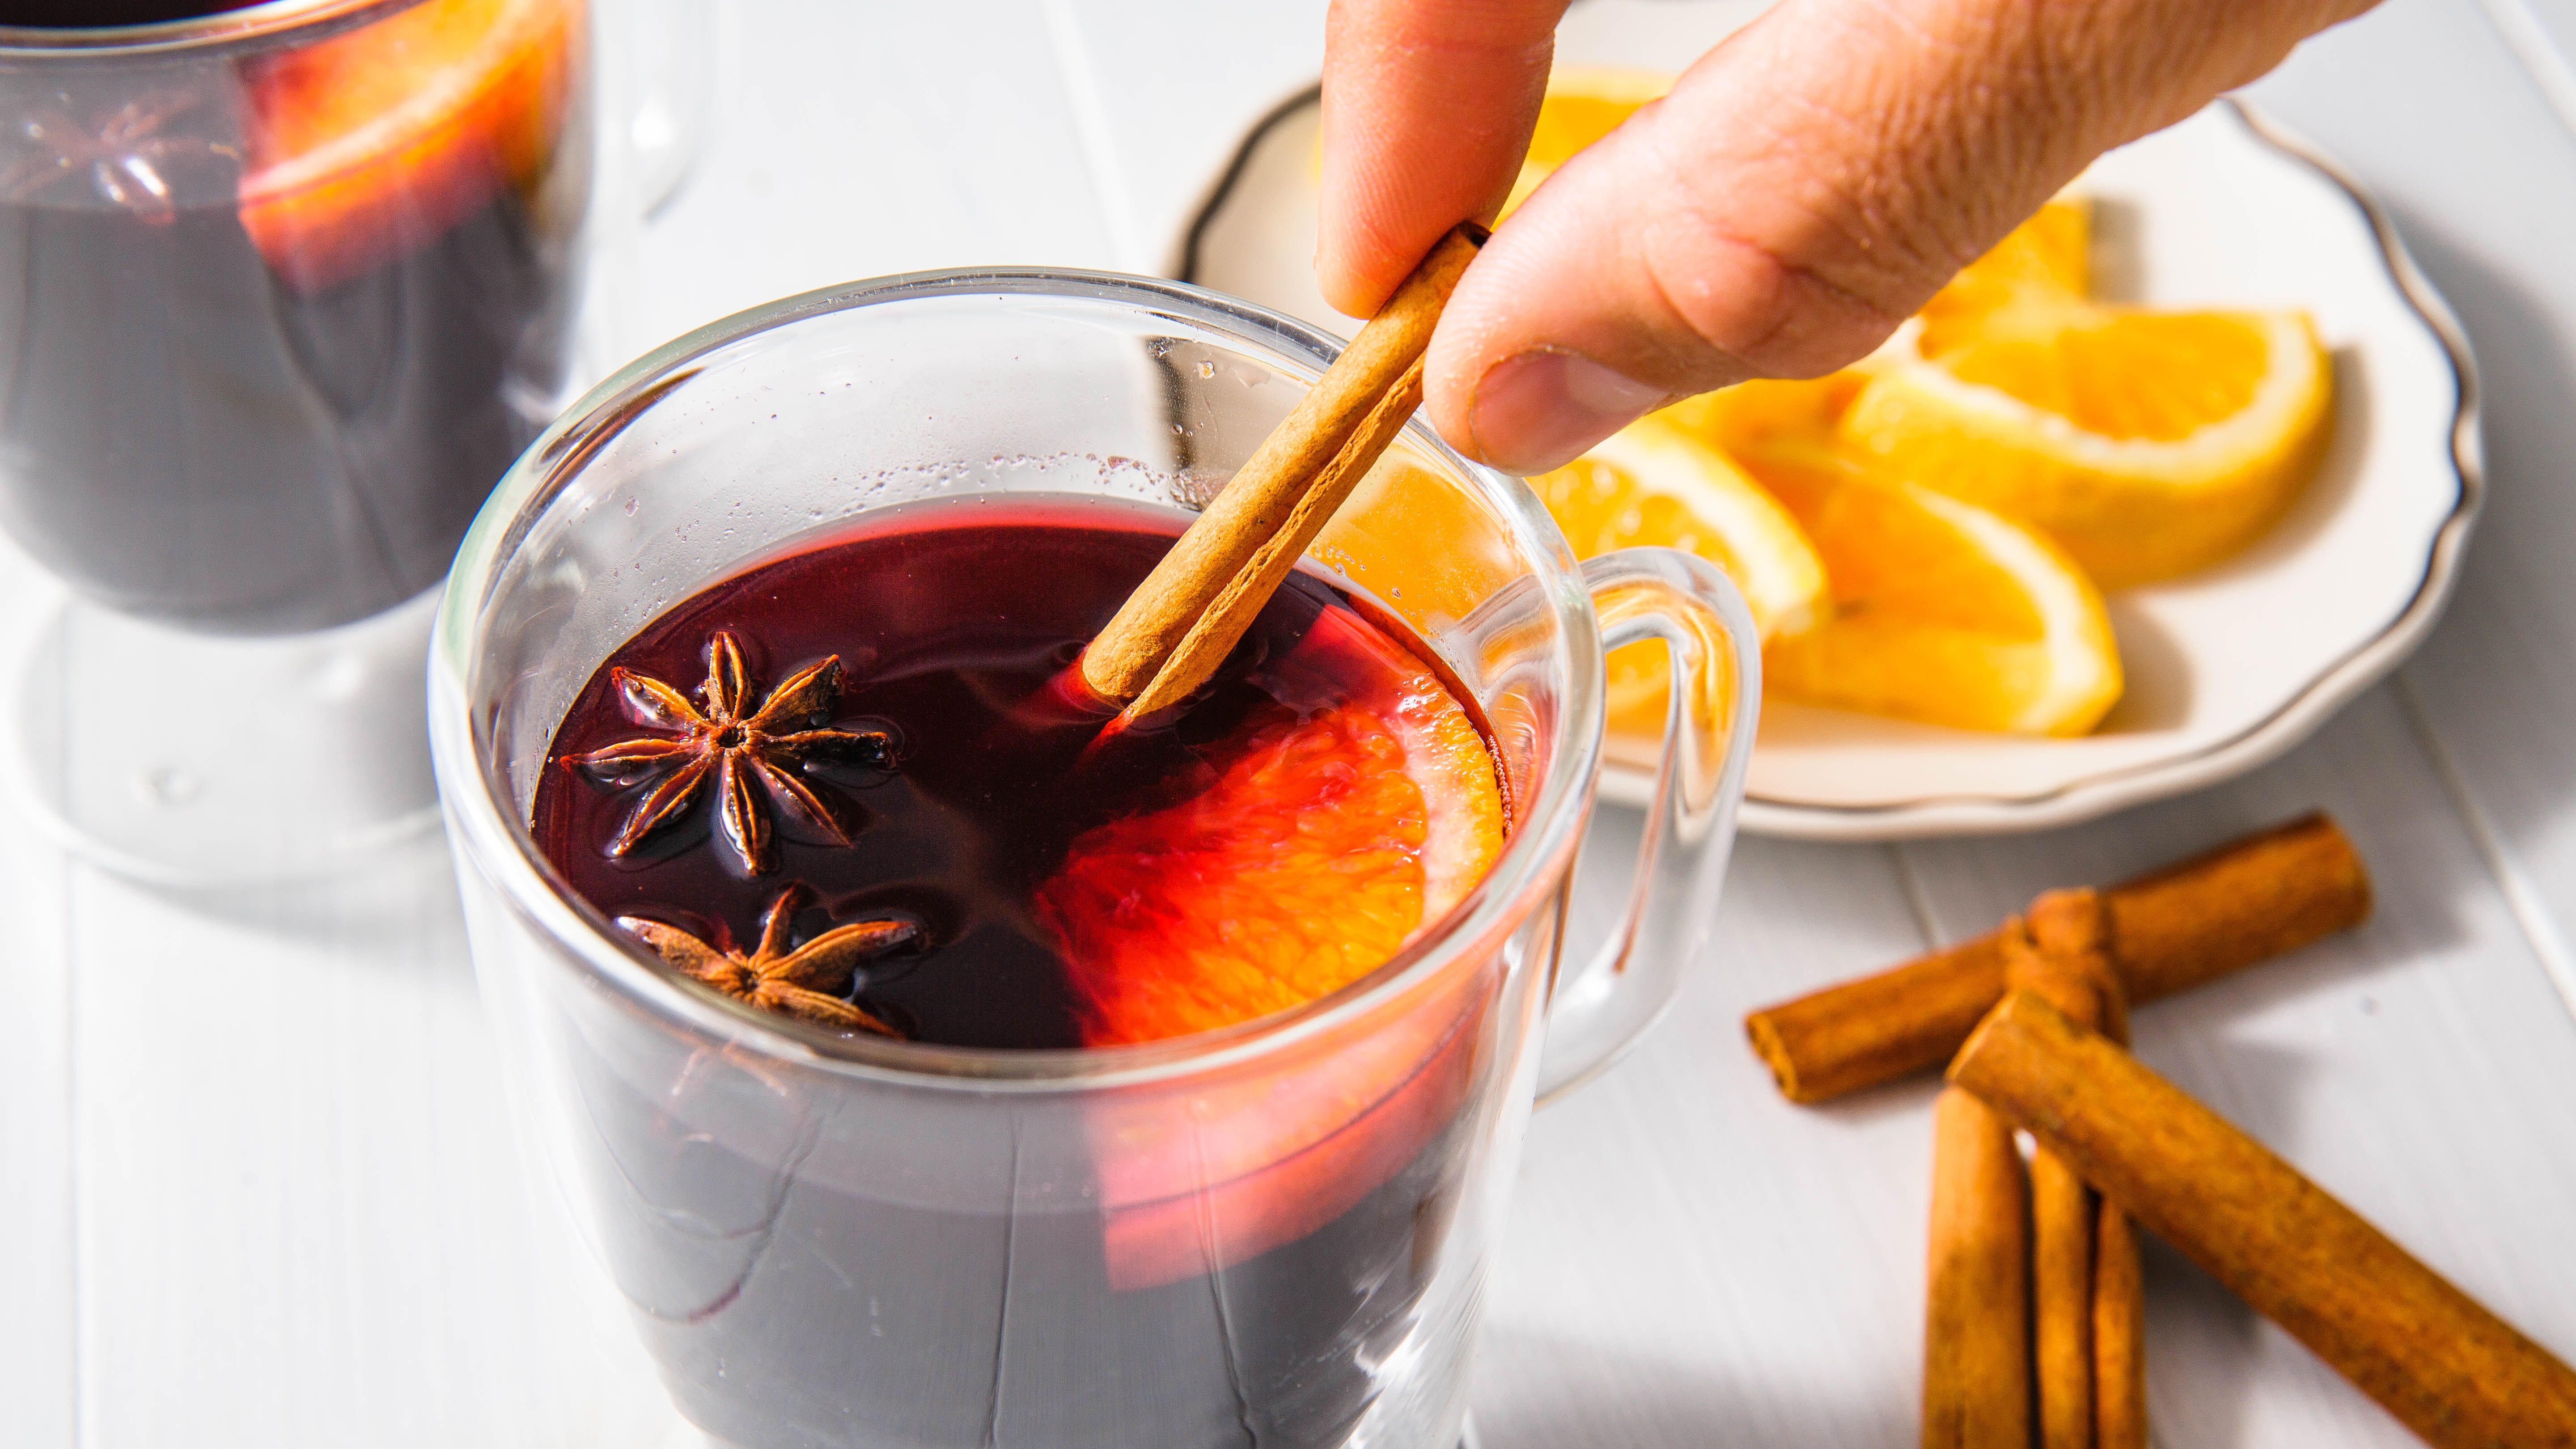 https://hips.hearstapps.com/hmg-prod/images/delish-mulled-wine-horizontal-1613745317.jpg?crop=1xw:0.84375xh;center,top